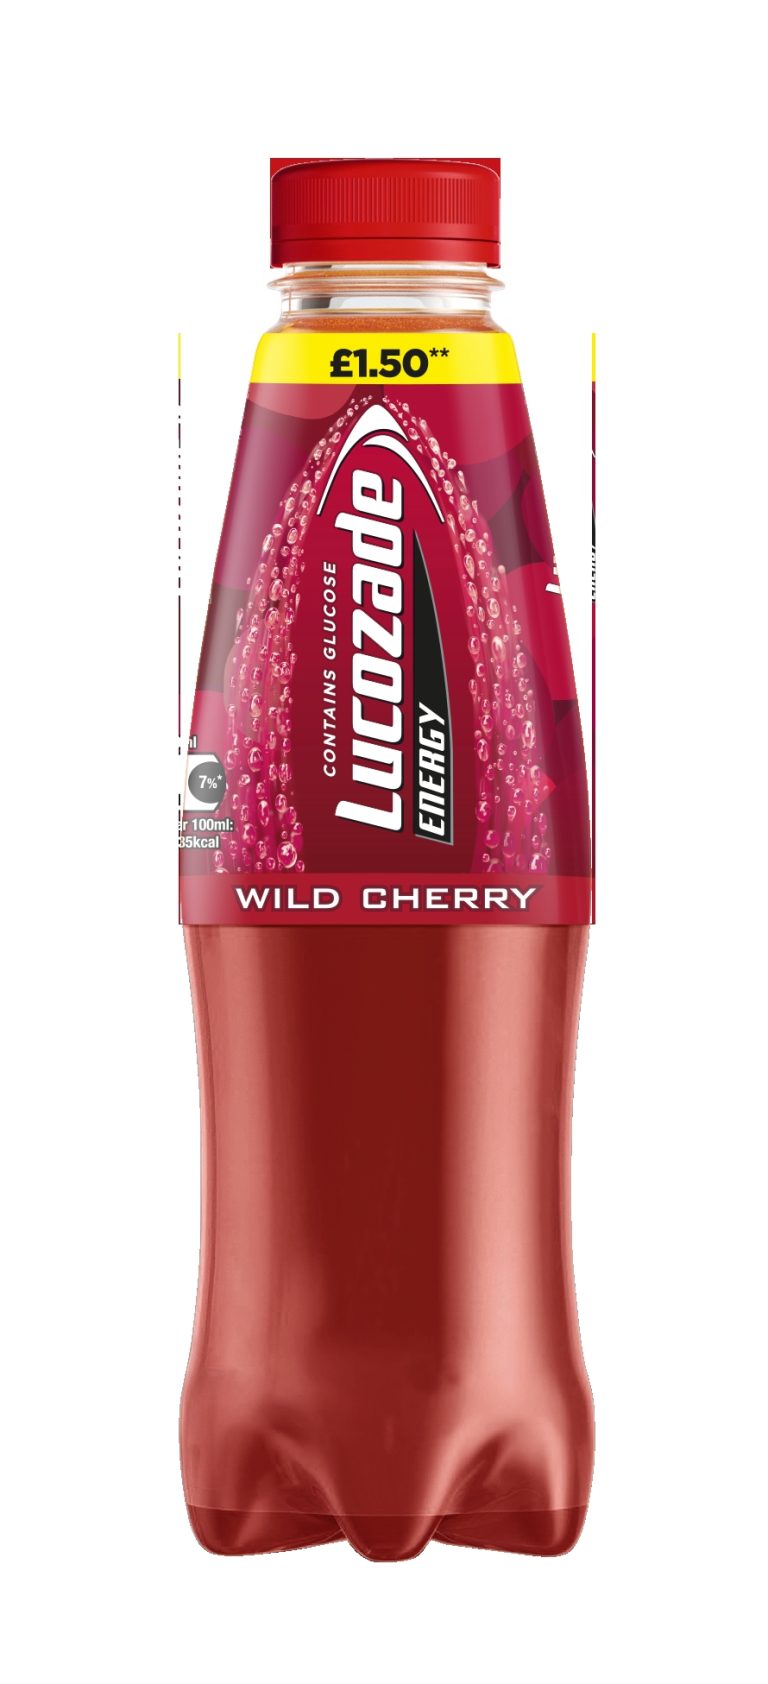 Lucozade Energy moves 380ml single SKUs to 500ml, including new PMP